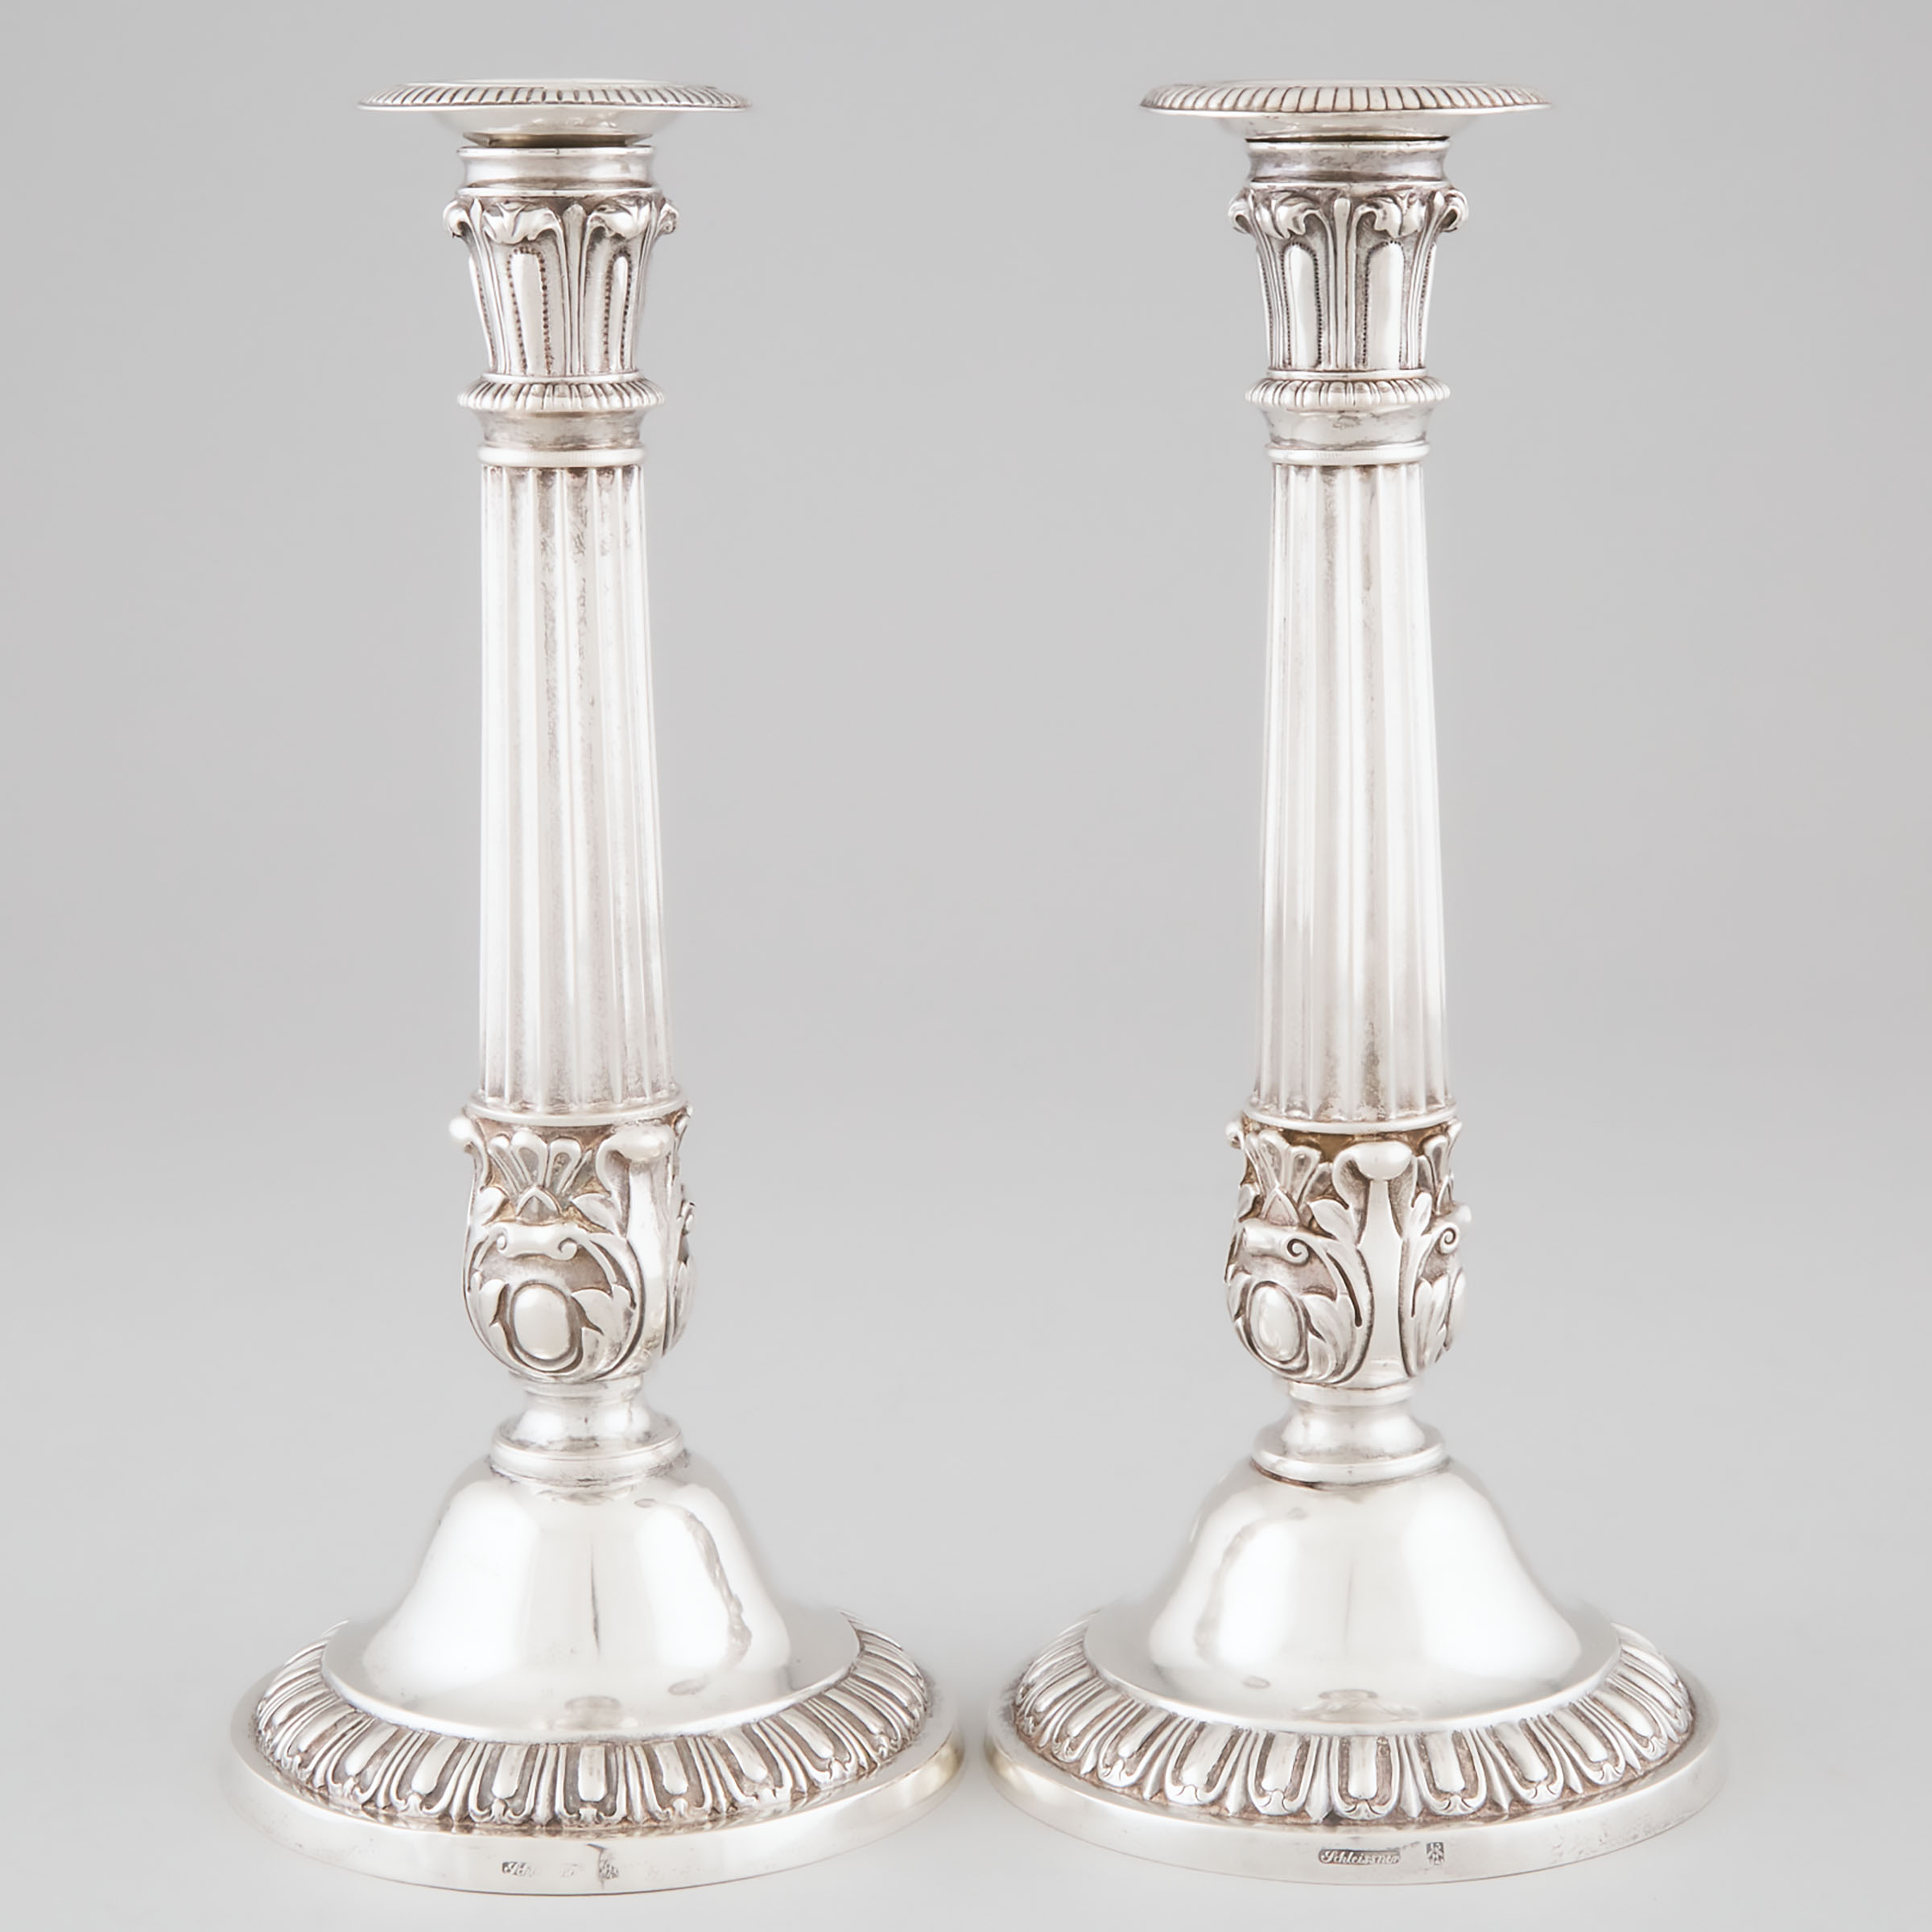 Pair of German Silver Table Candlesticks,